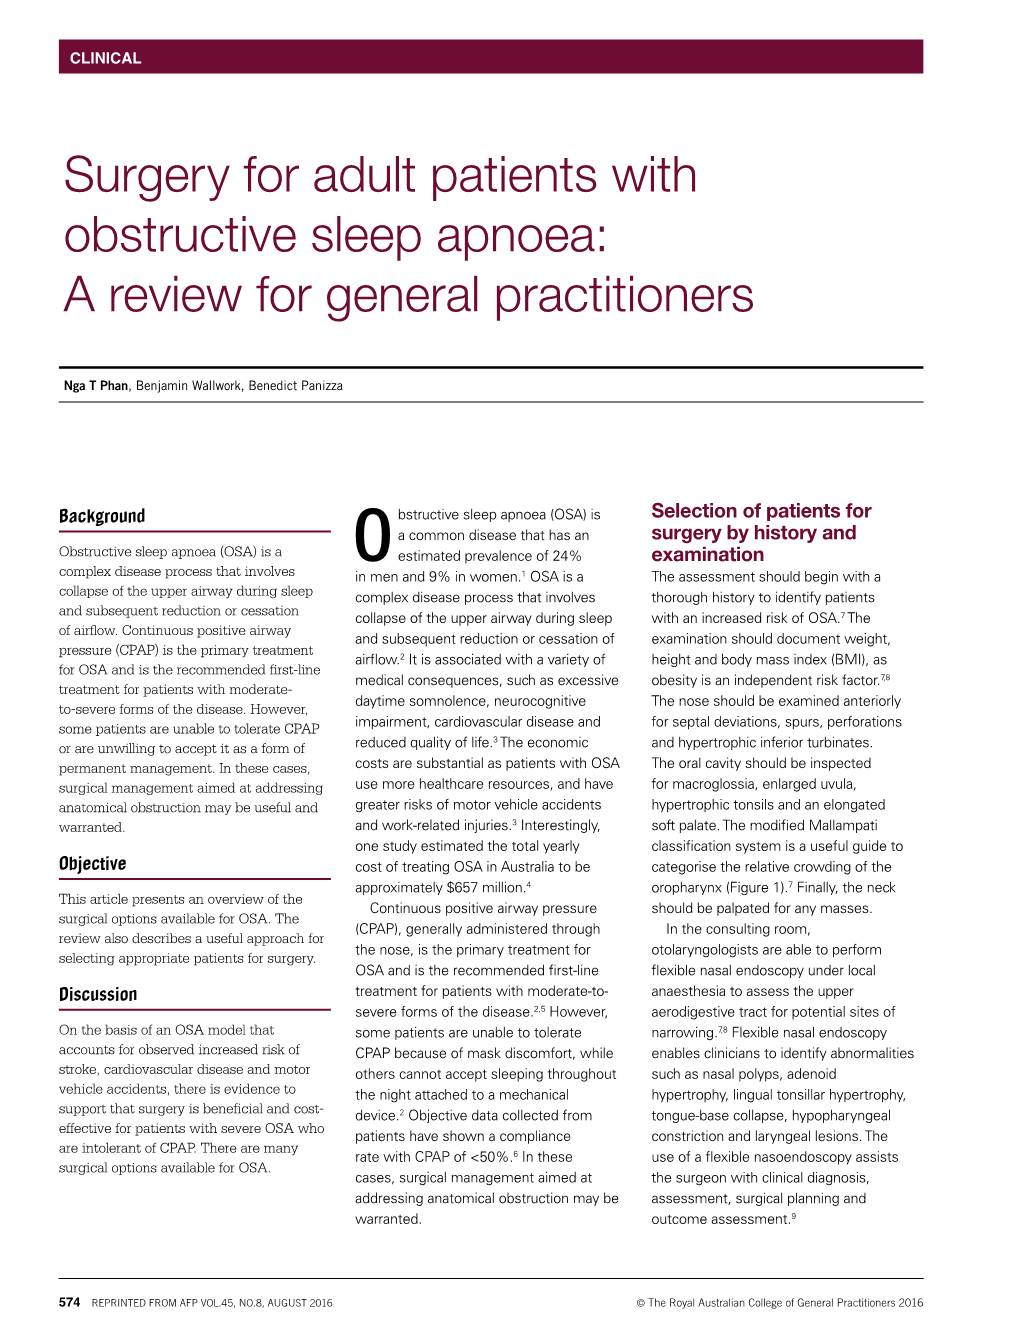 Surgery for Adult Patients with Obstructive Sleep Apnoea: a Review for General Practitioners